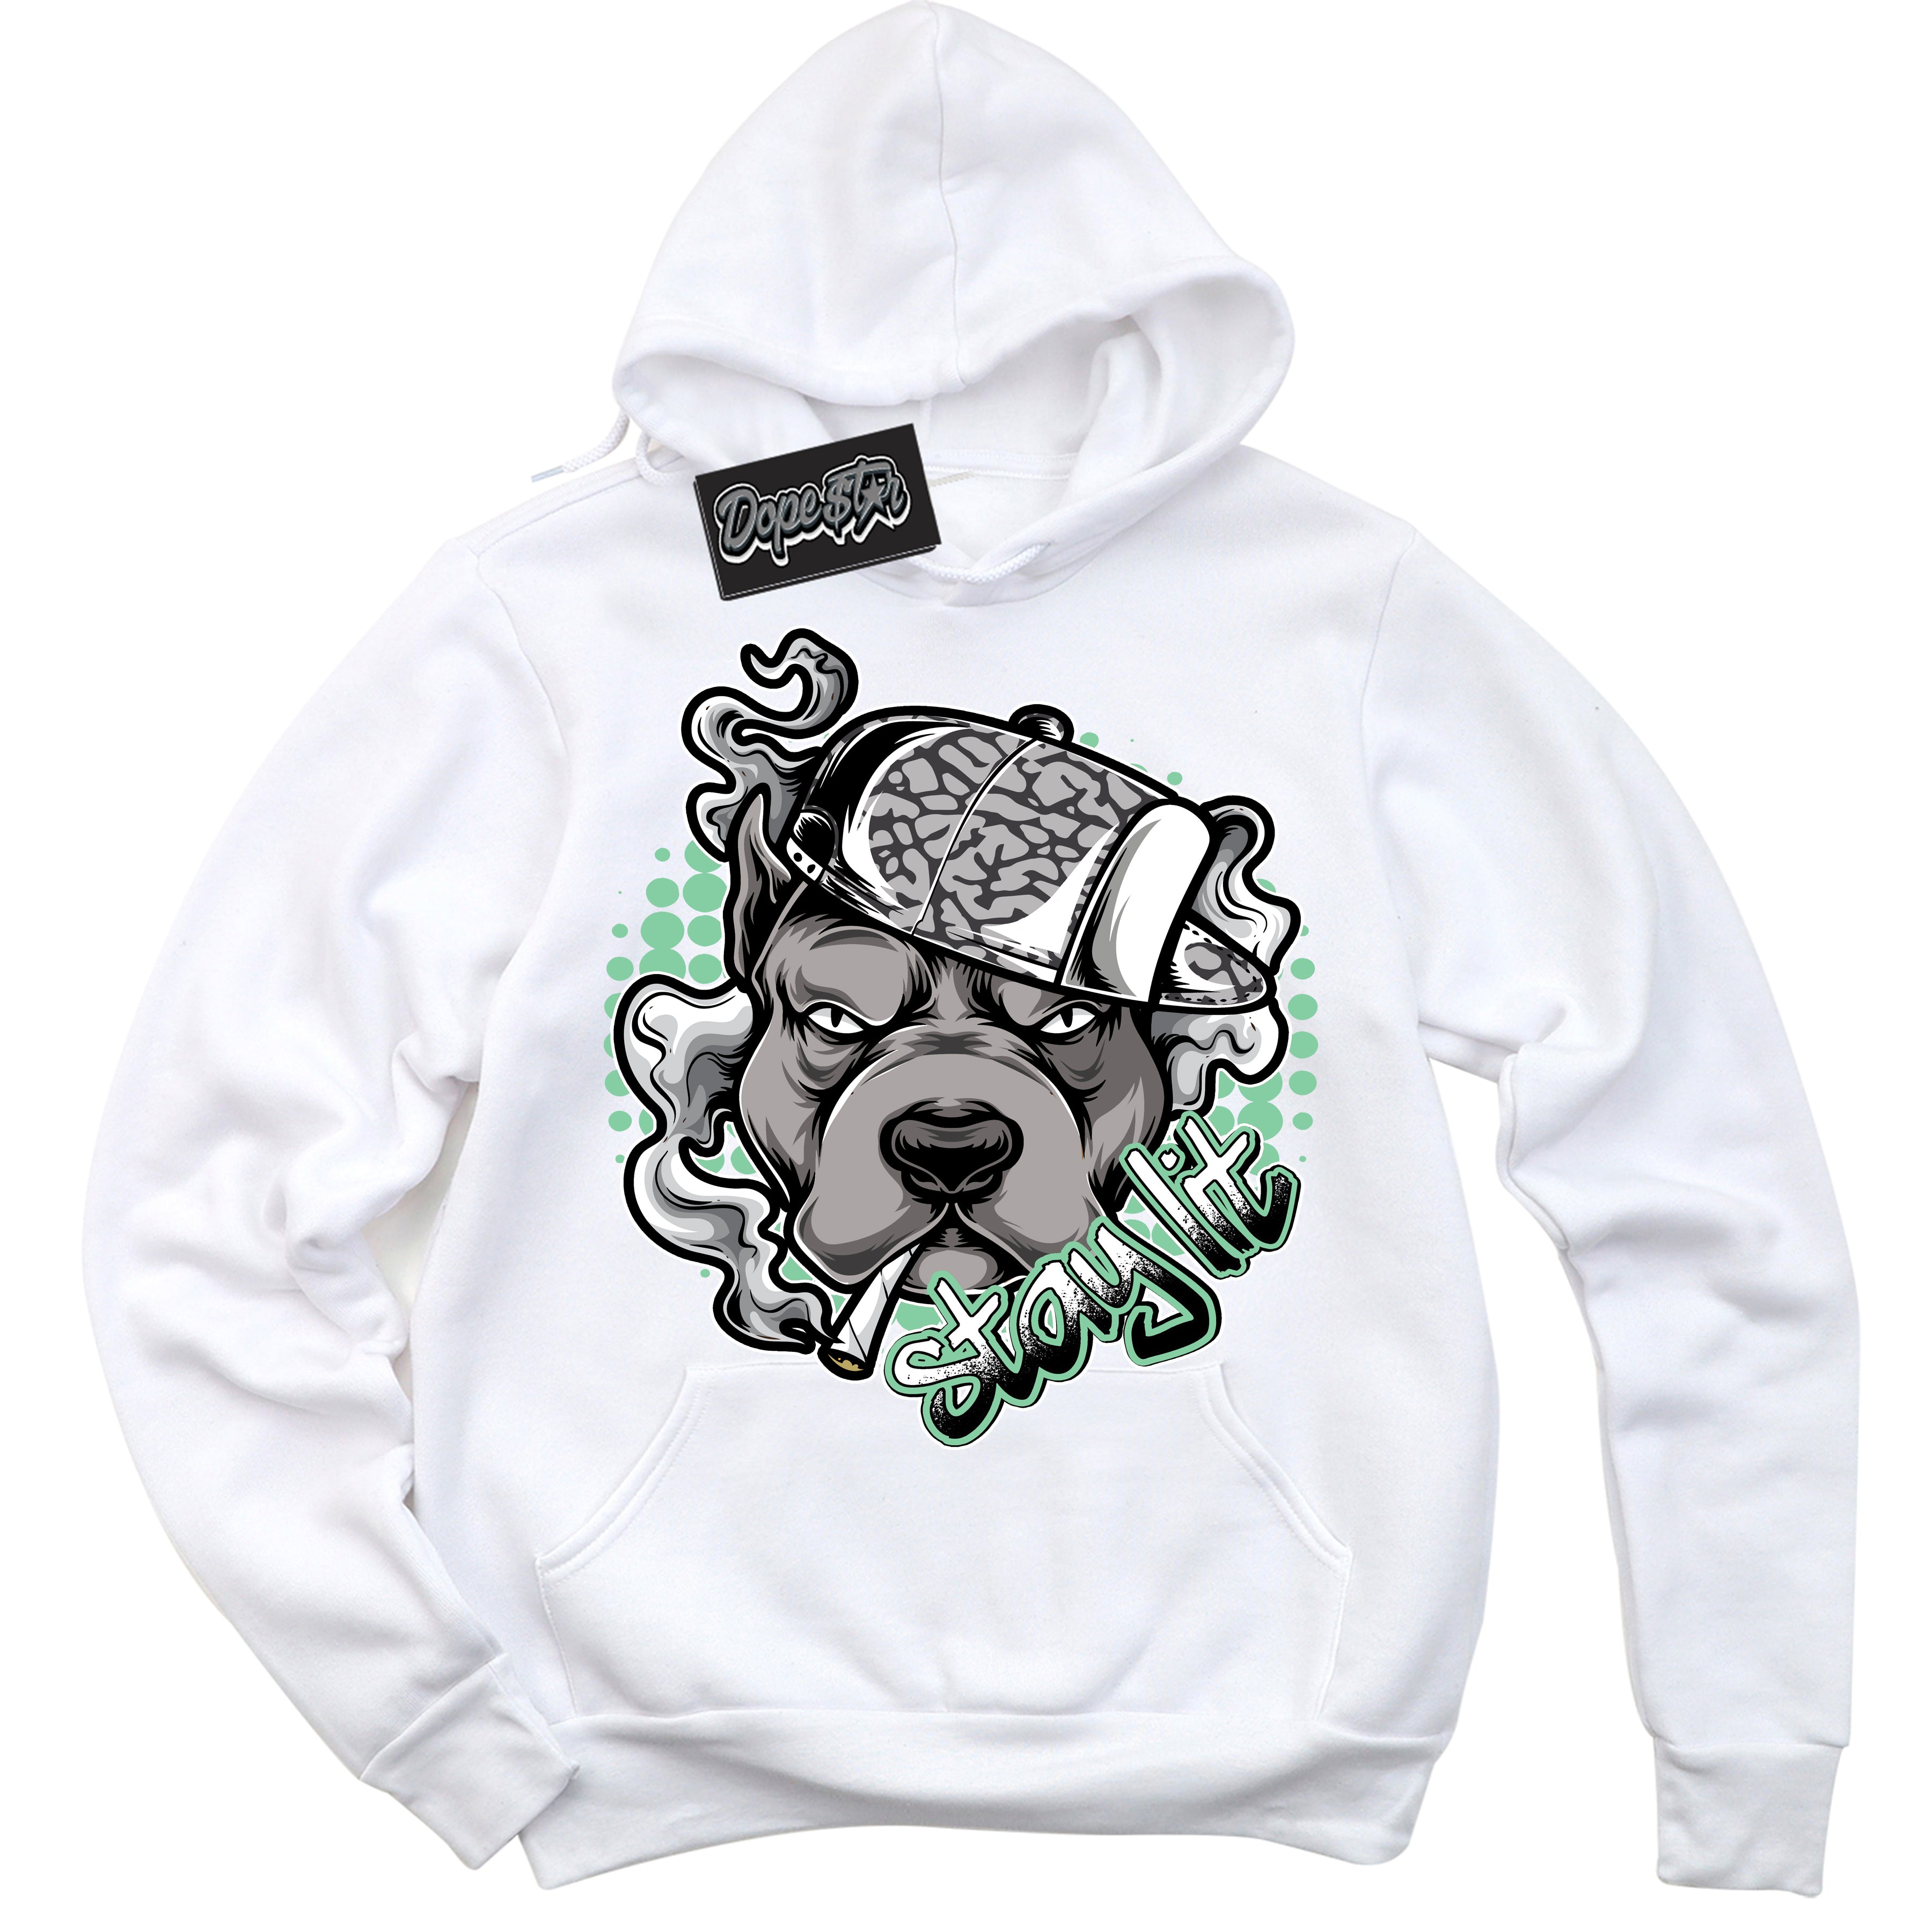 Cool White Graphic DopeStar Hoodie with “ Stay Lit “ print, that perfectly matches Green Glow 3s sneakers